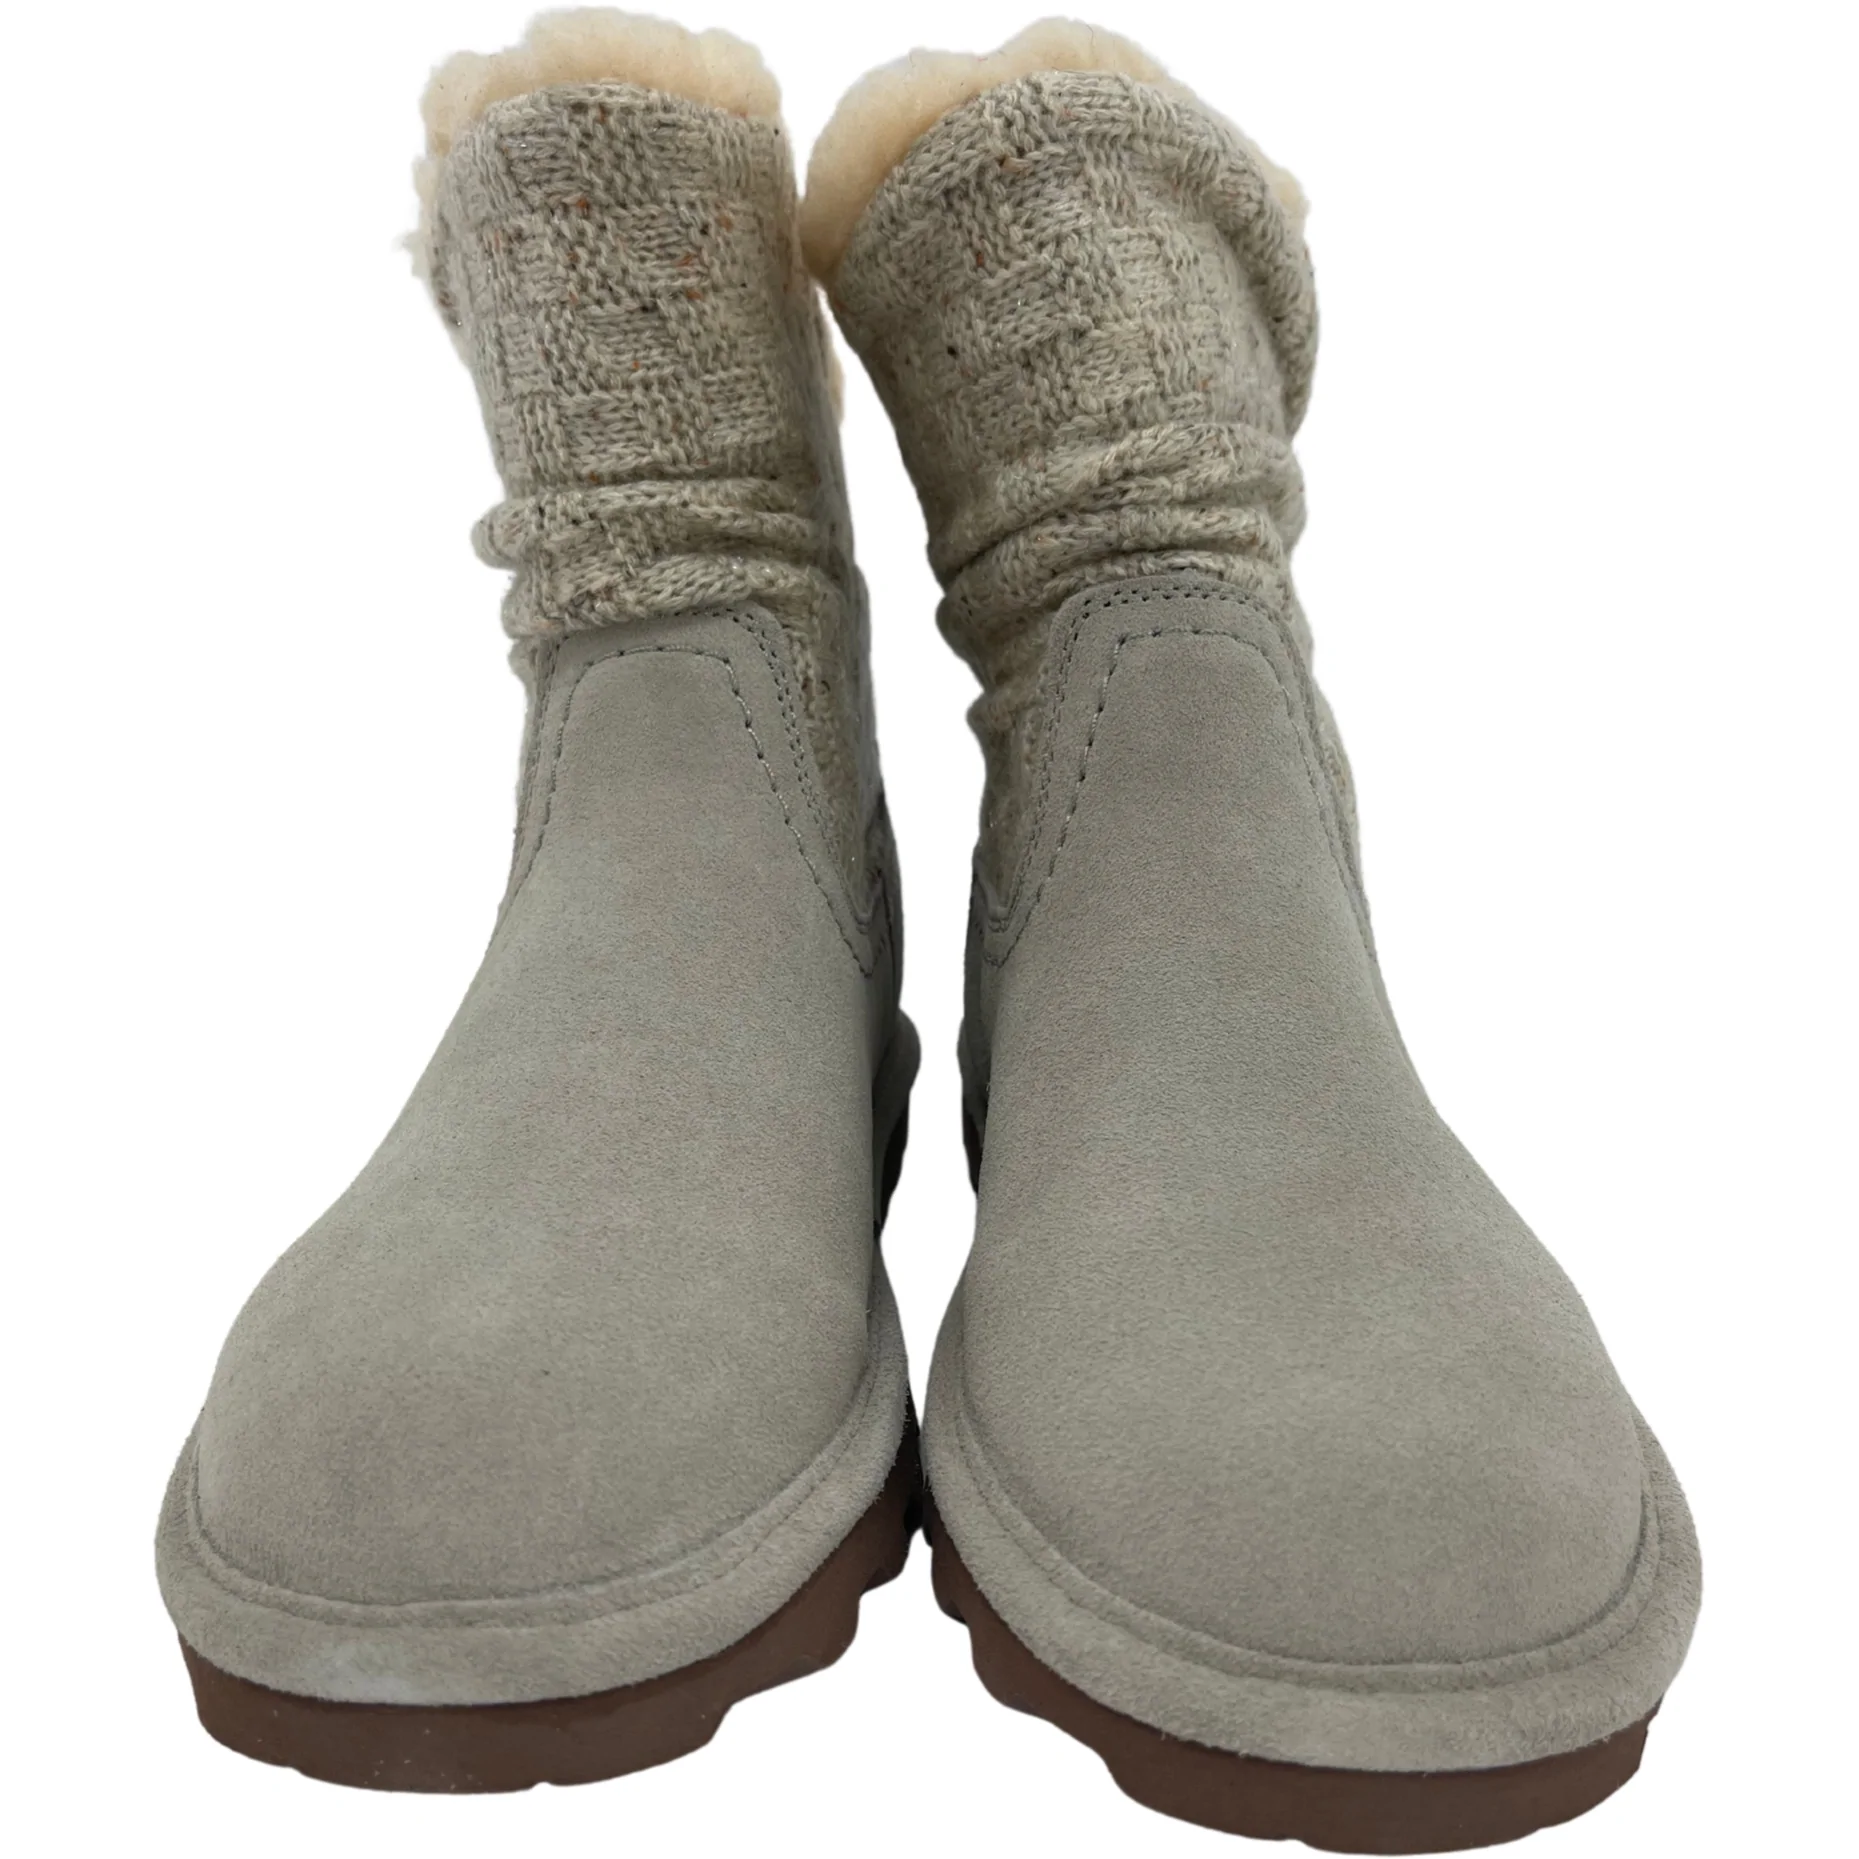 BearPaw Women's Winter Boots / Virginia / Winter White / Short Boot / Size 8 **No Tags**